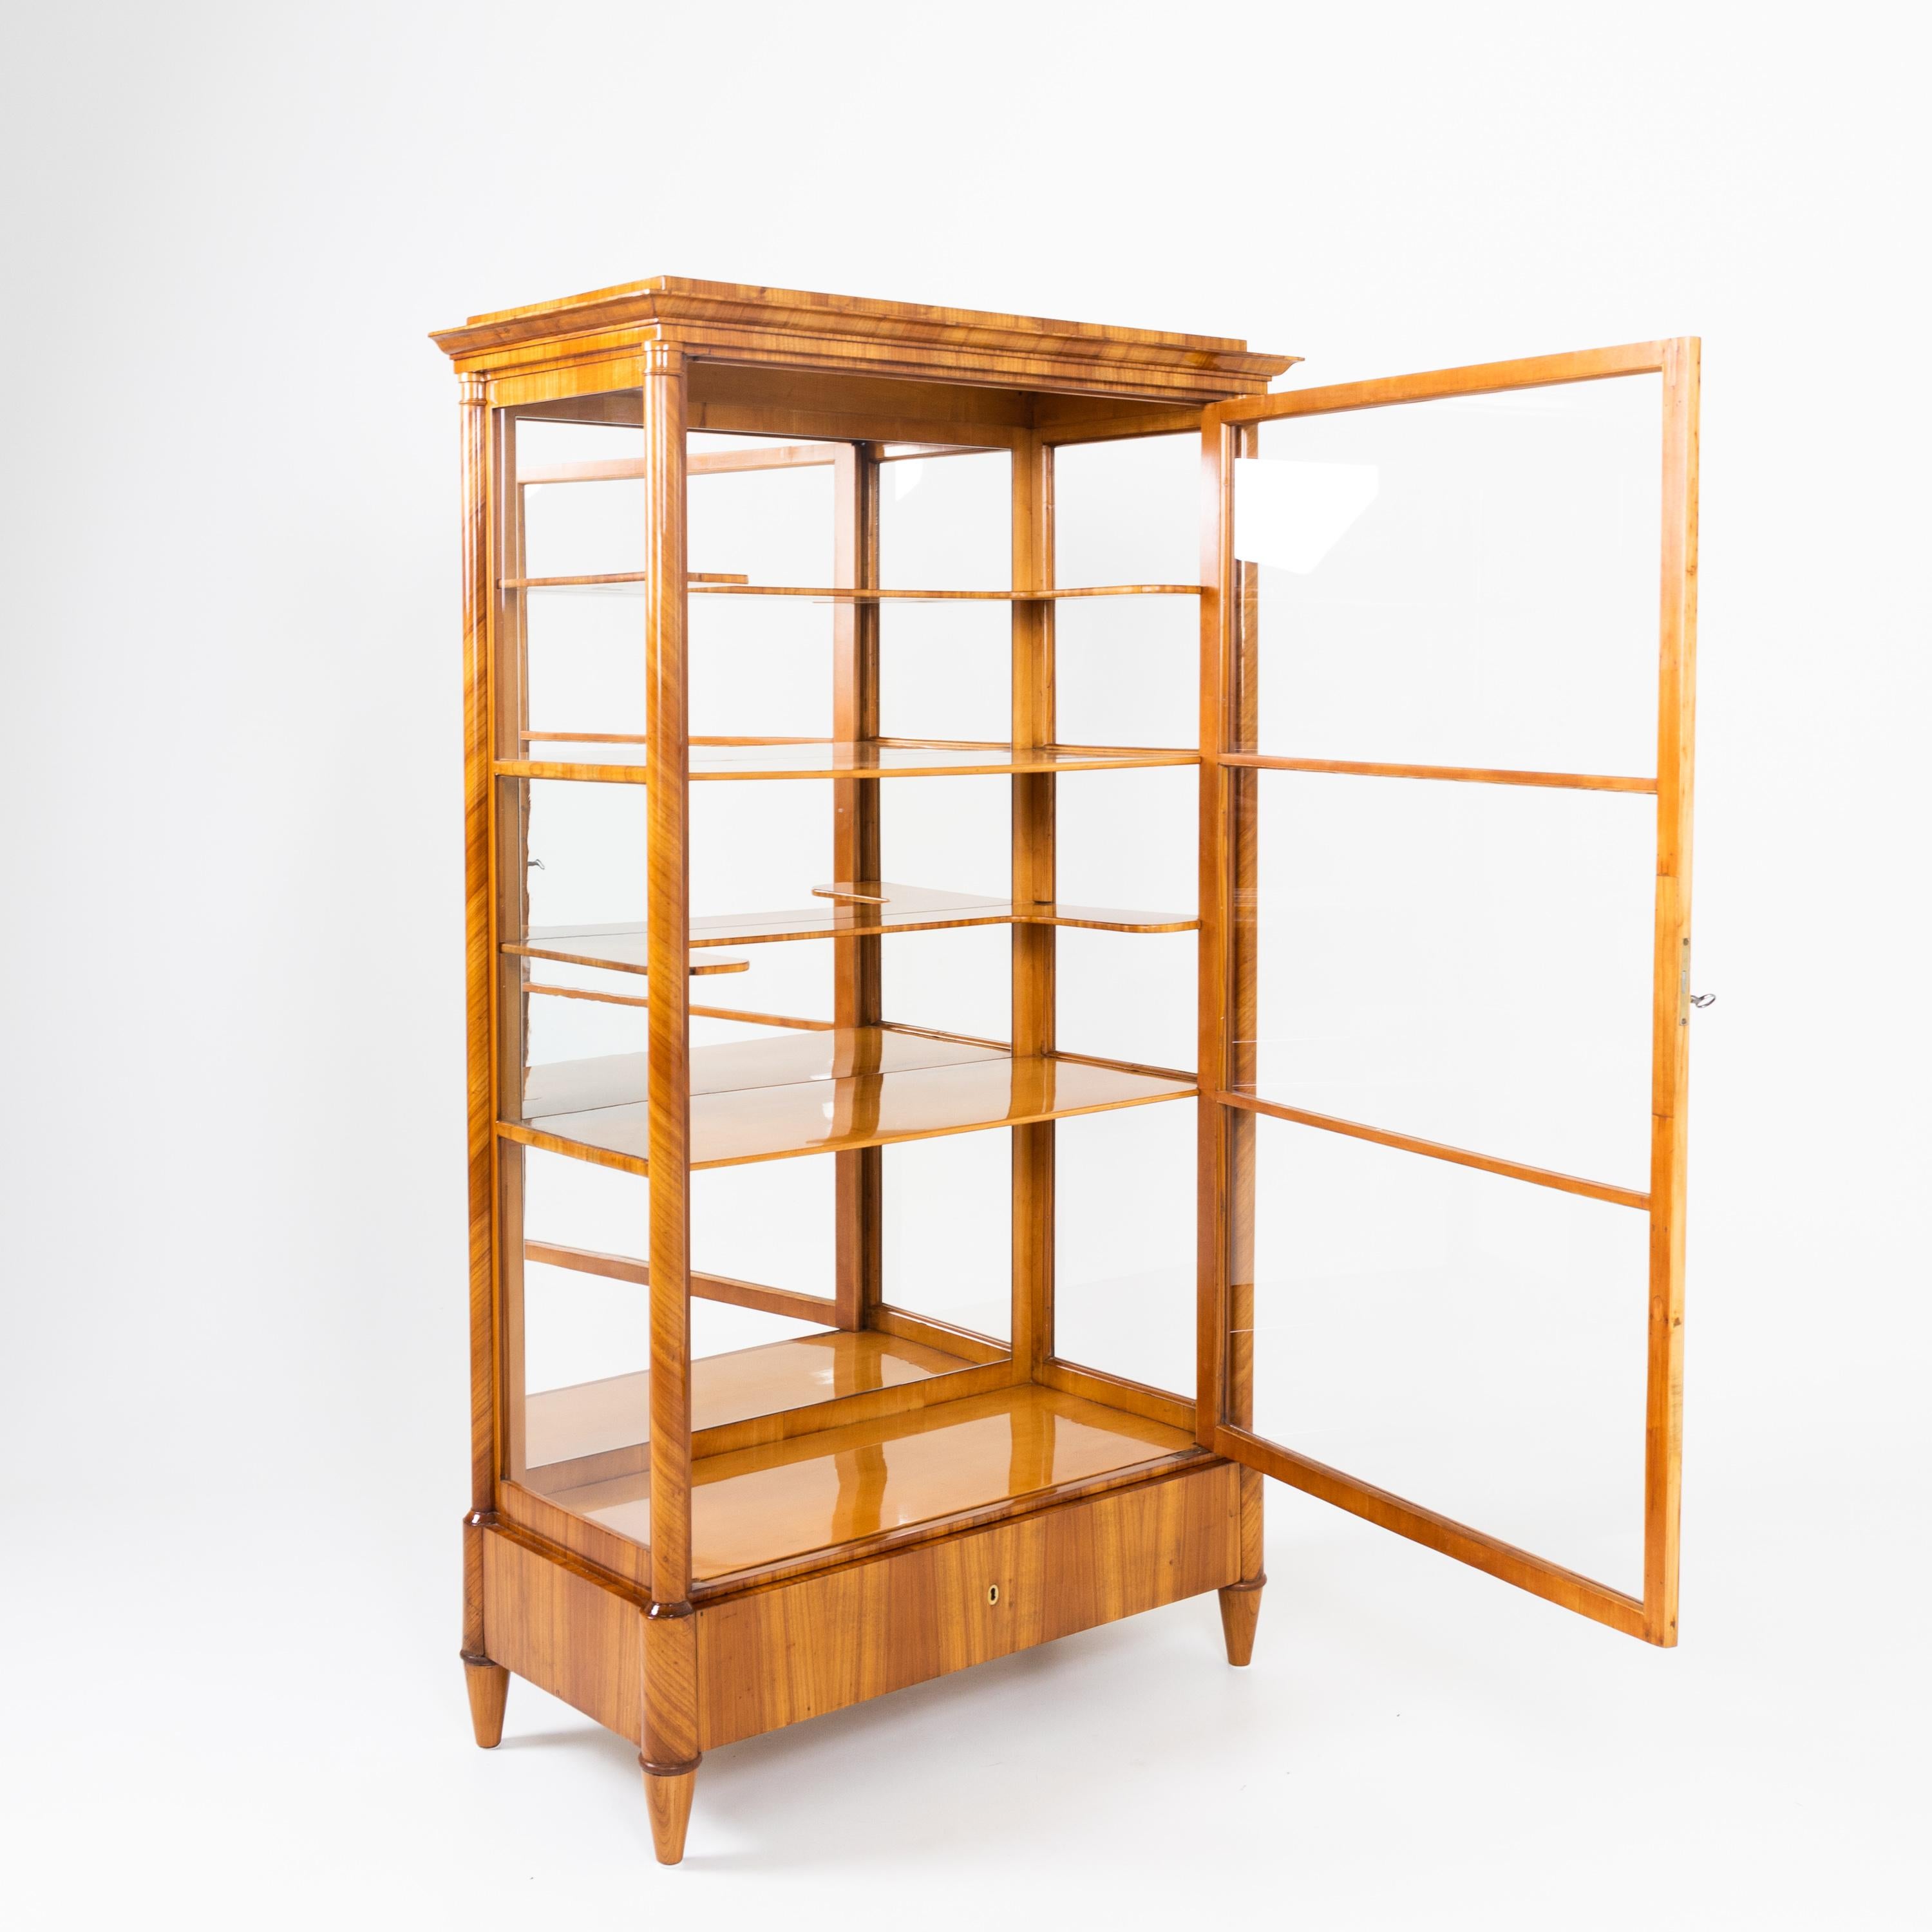 Three-sided glazed display case with one drawer standing on conical feet. The corners of the corpus are flanked by columns of solid cherry and support the multiple profiled cornice. The interior with mirrored back panel consists of four shelves, two